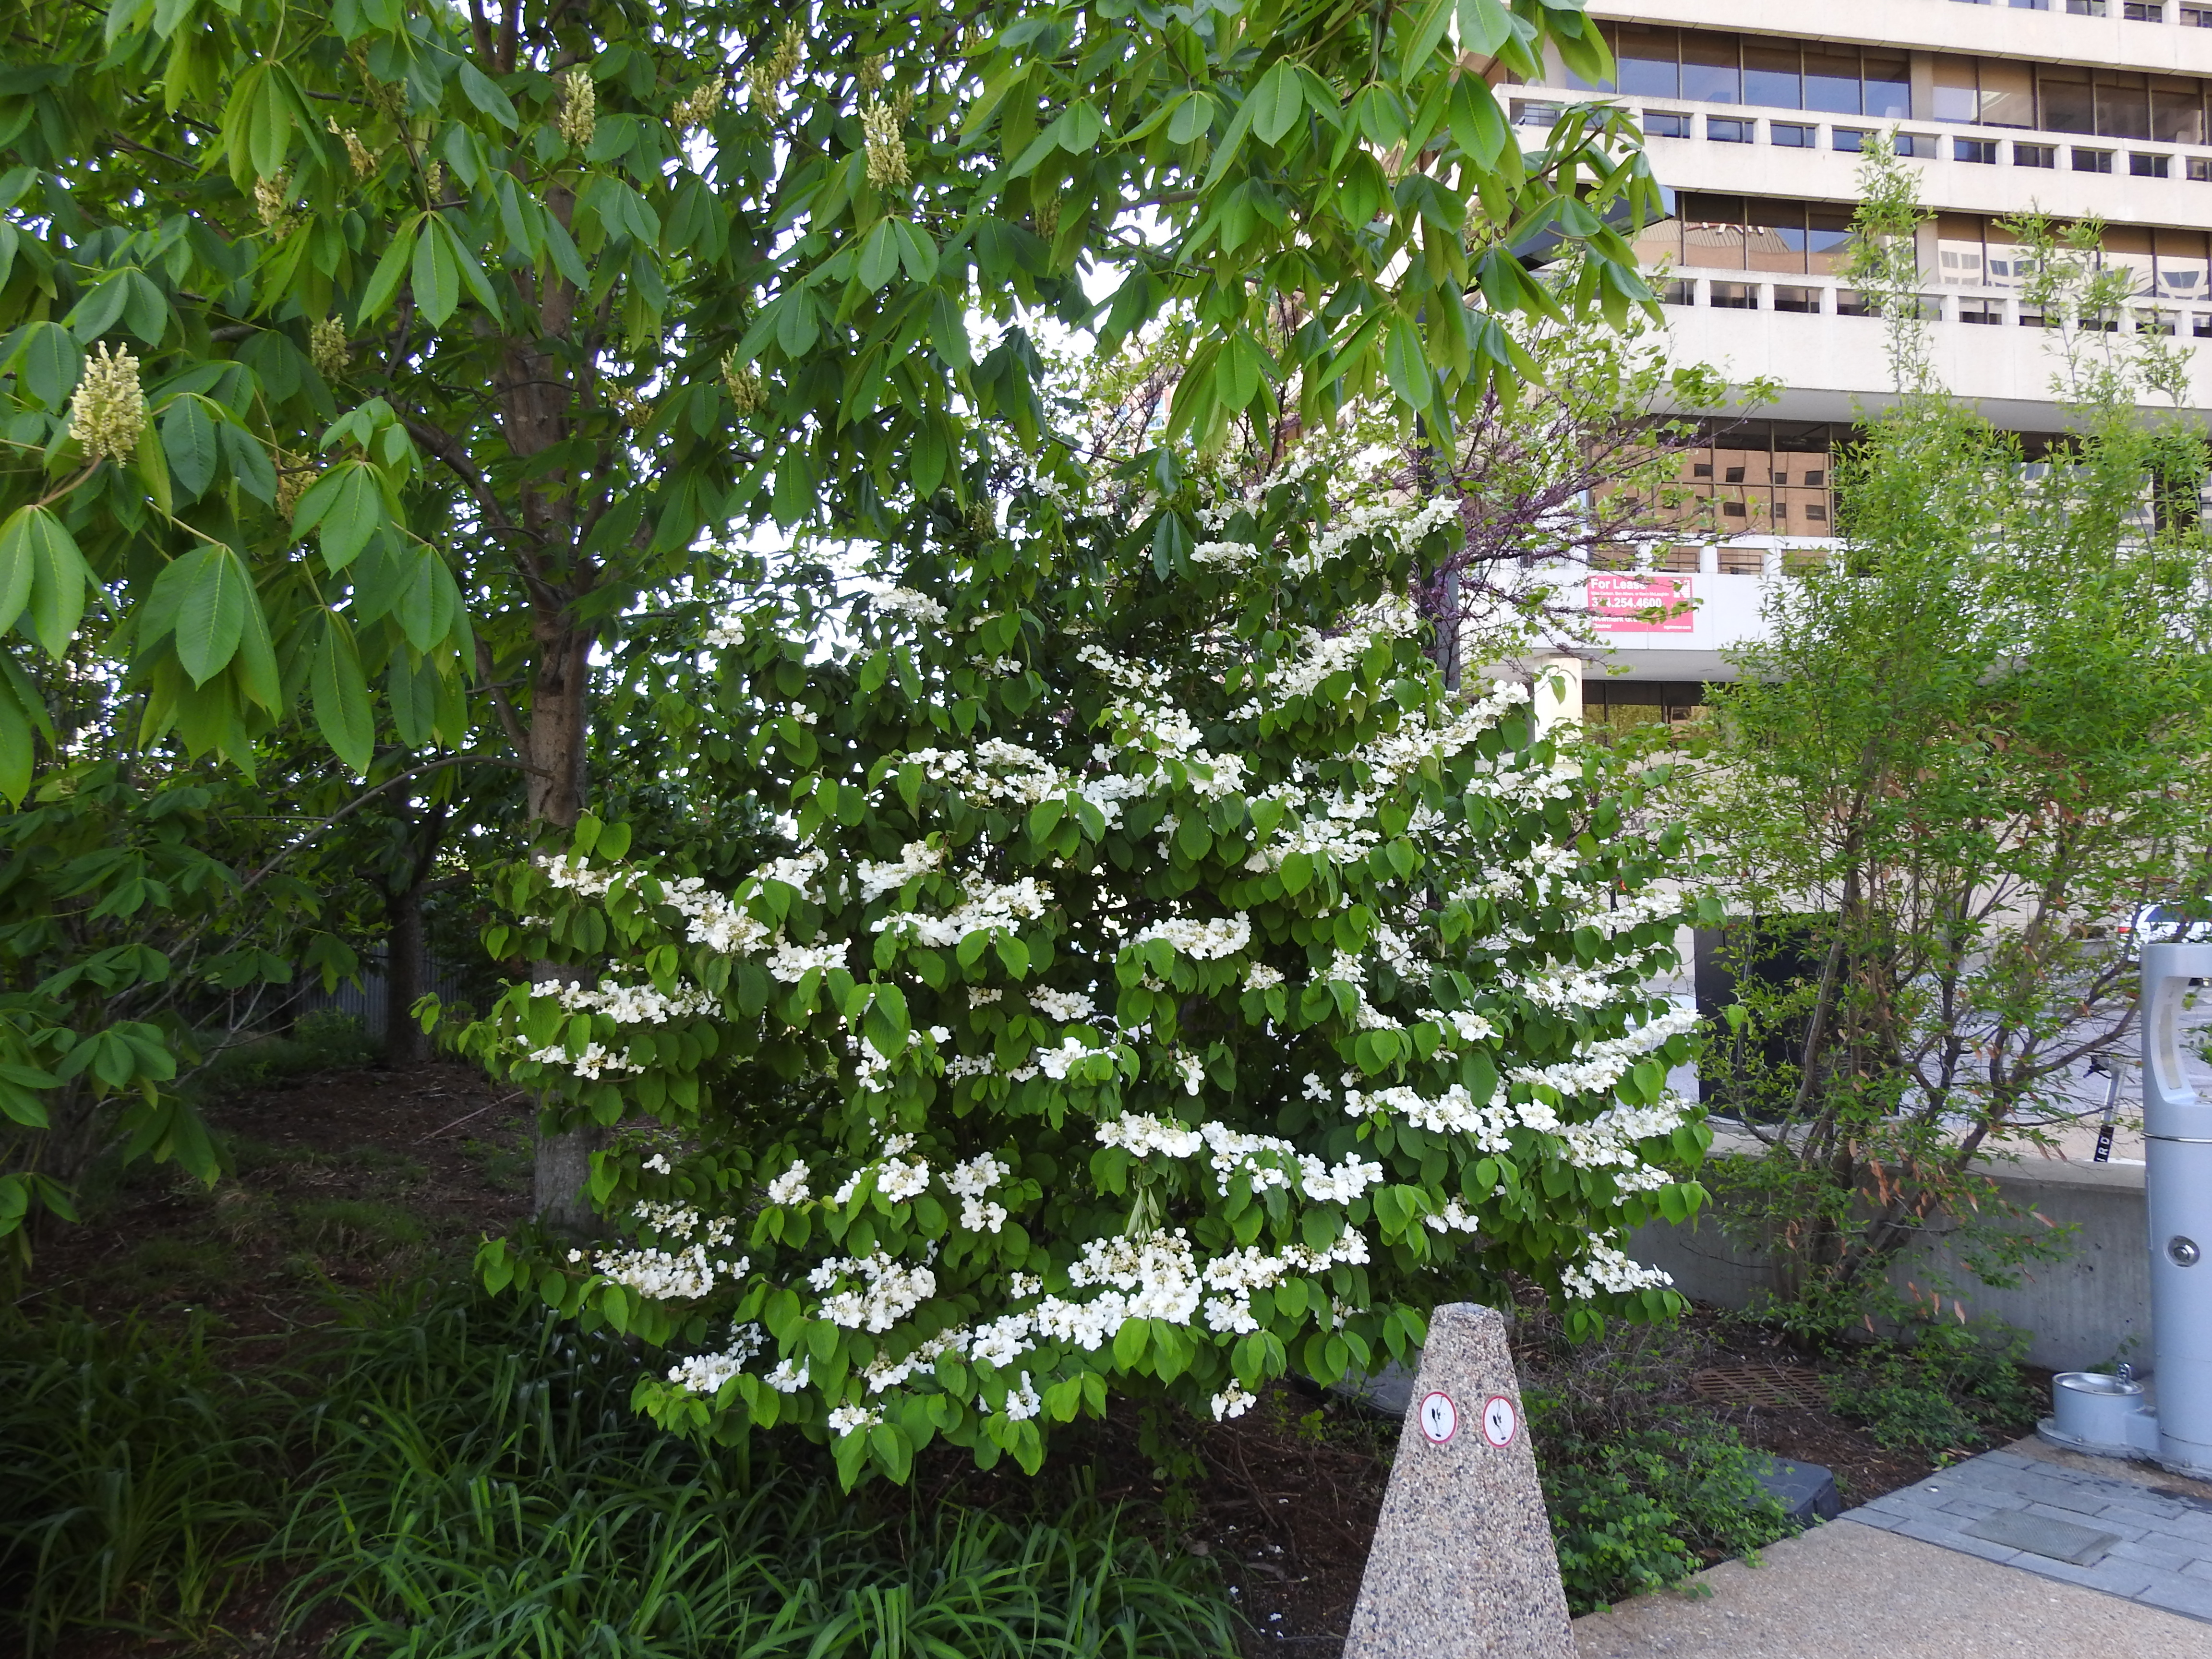 A small tree with white flowers.